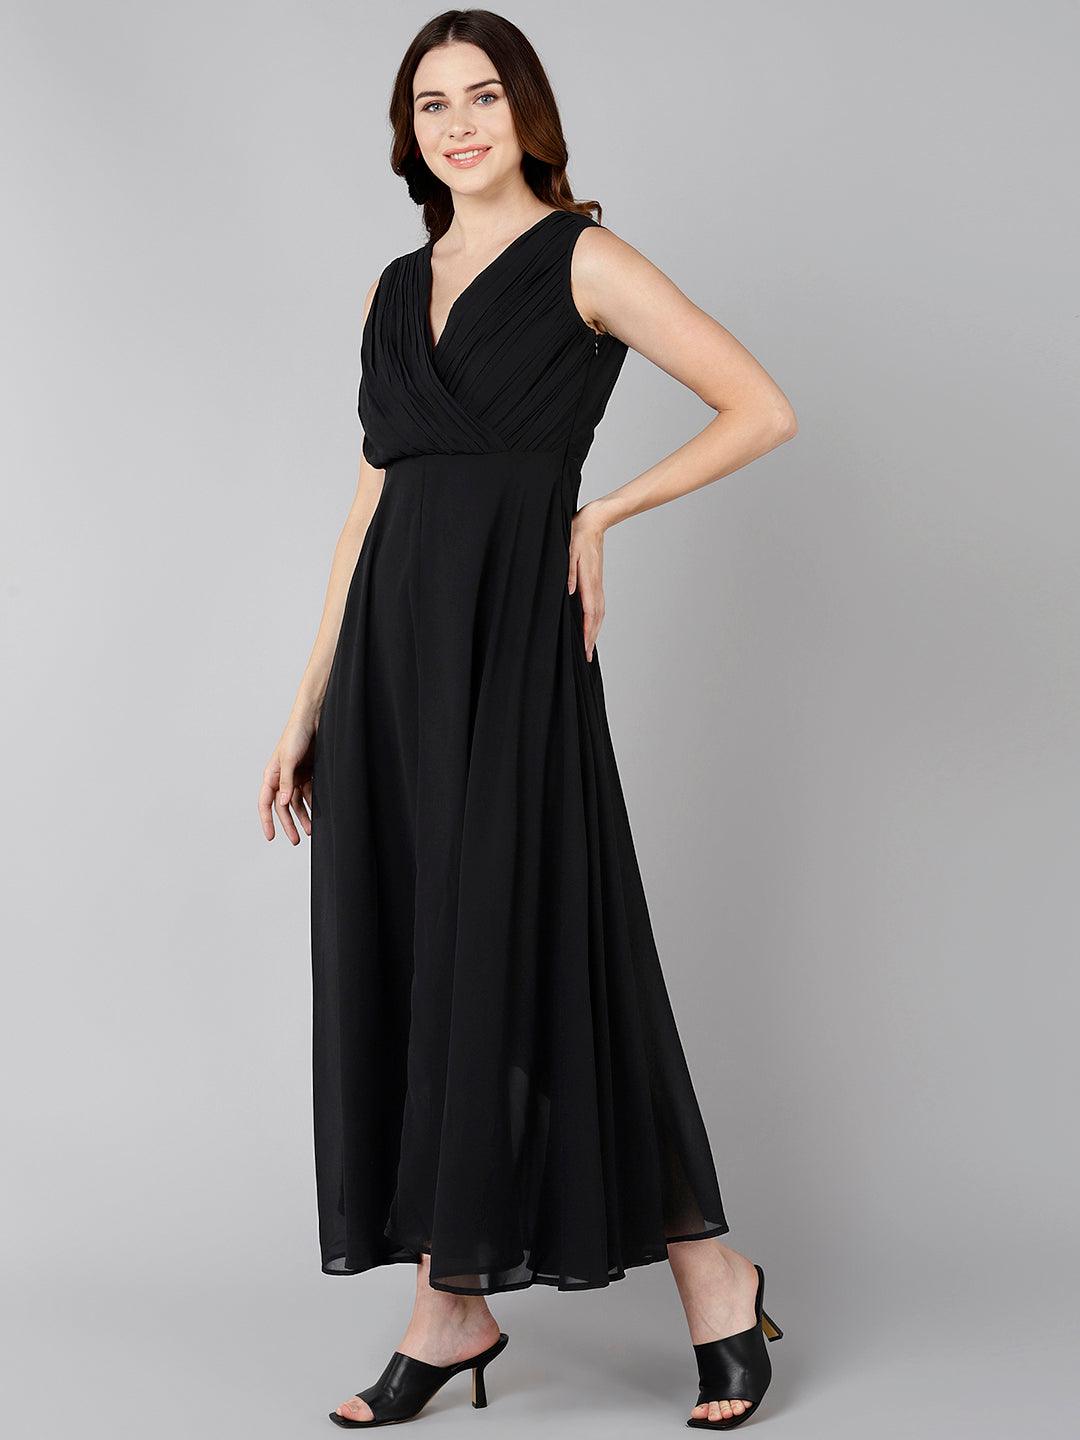 Solid Black Flared Dress - Znxclothing